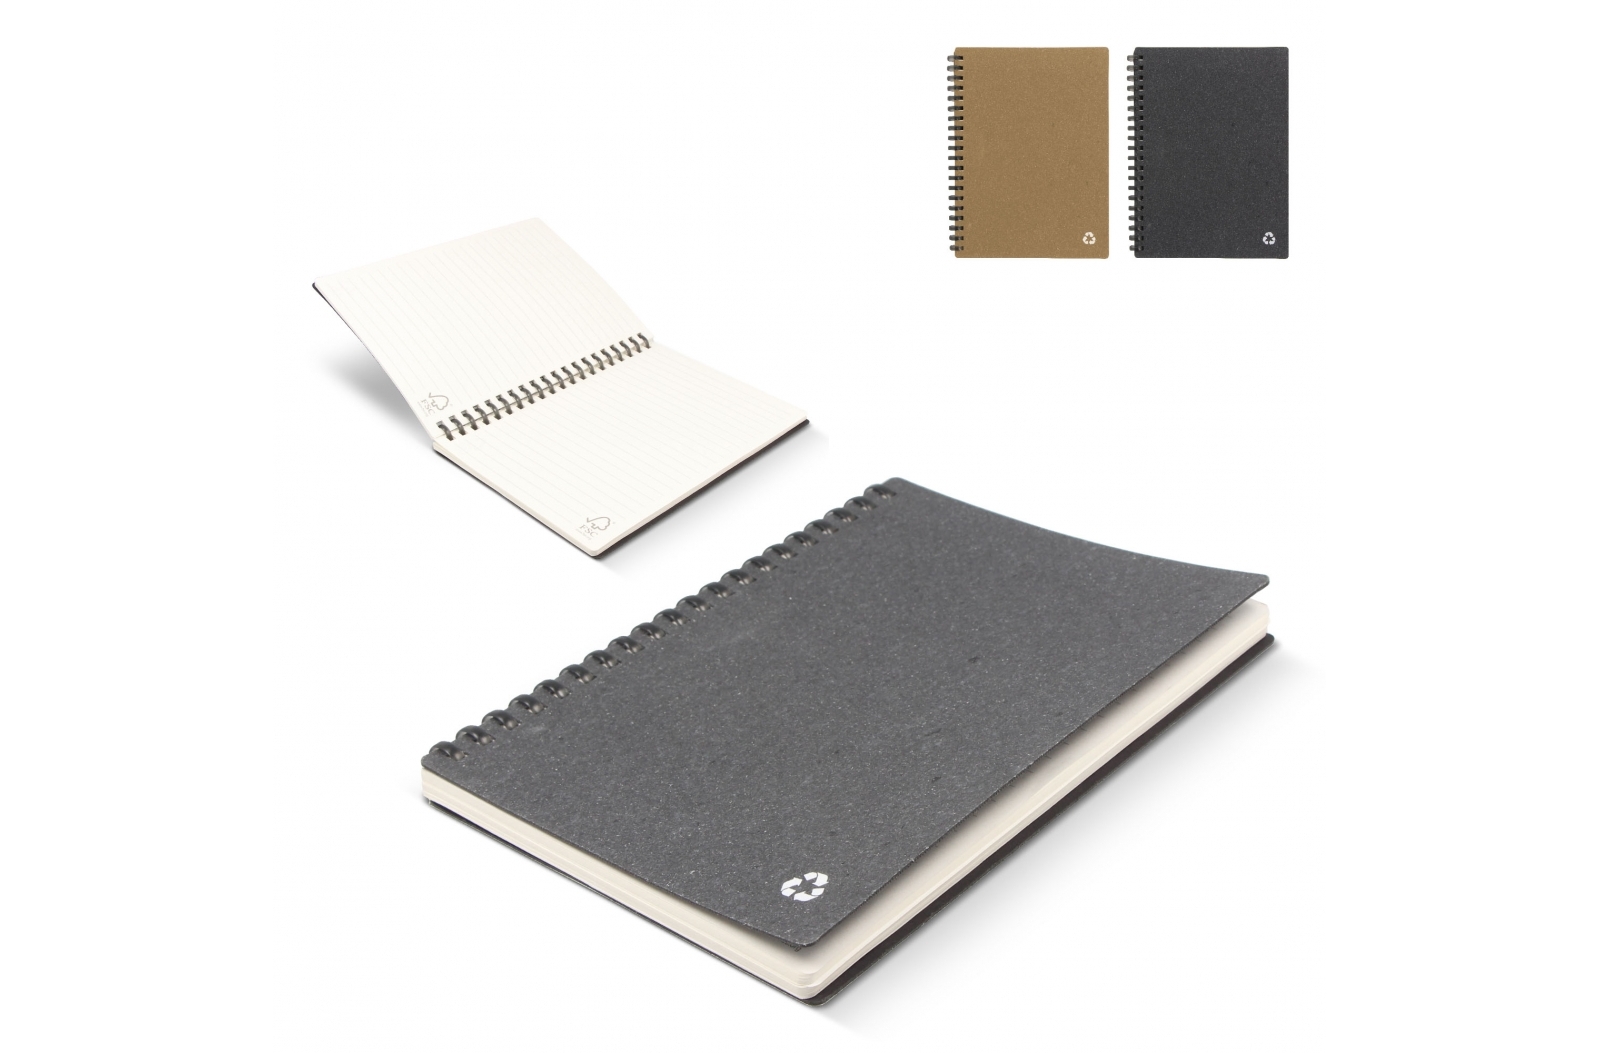 Midi Notebook made of recycled leather - Tarrant Hinton